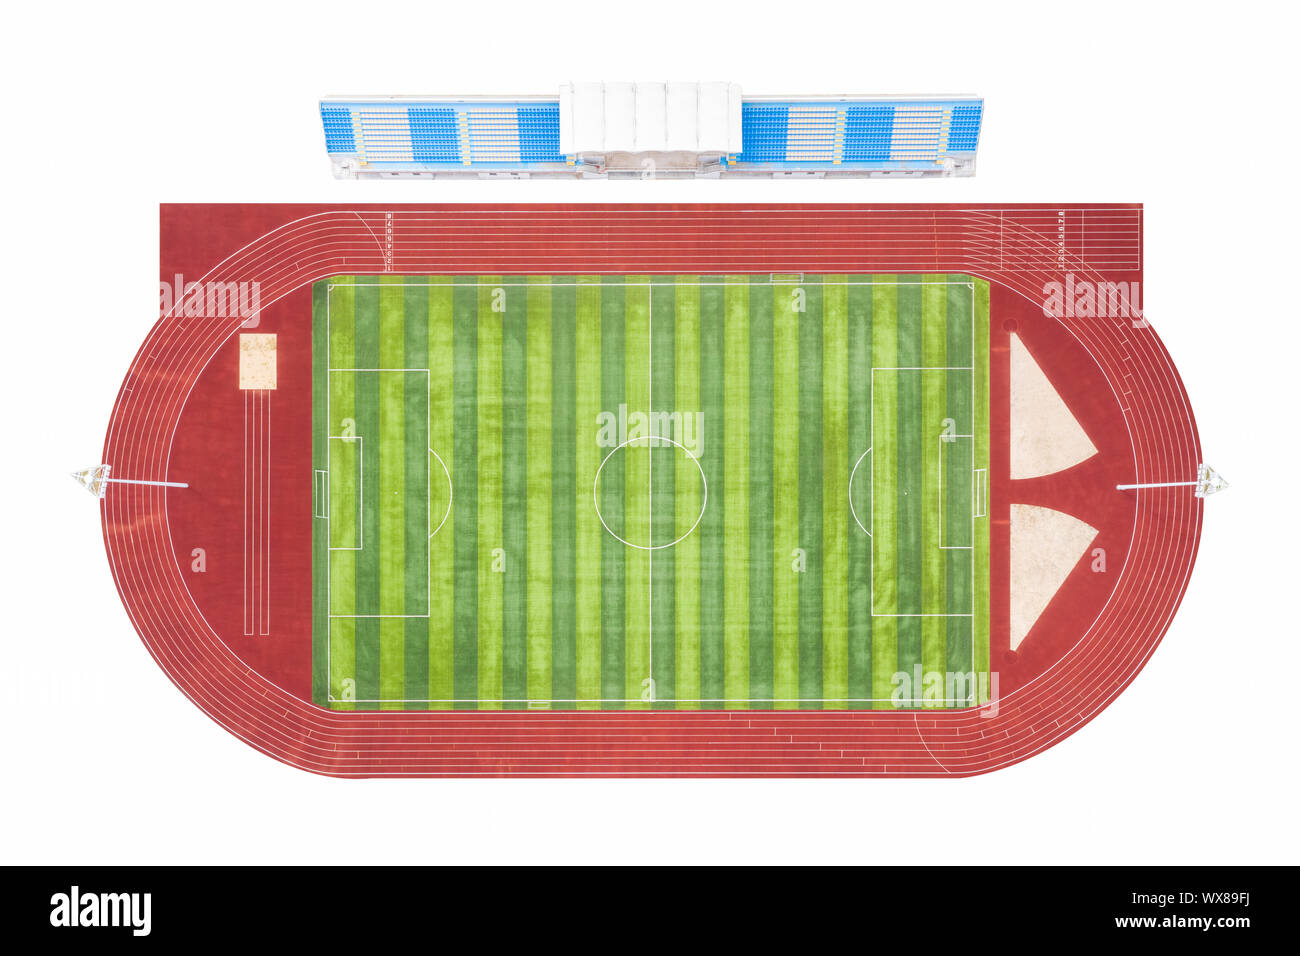 sports stand, runway and football field Stock Photo